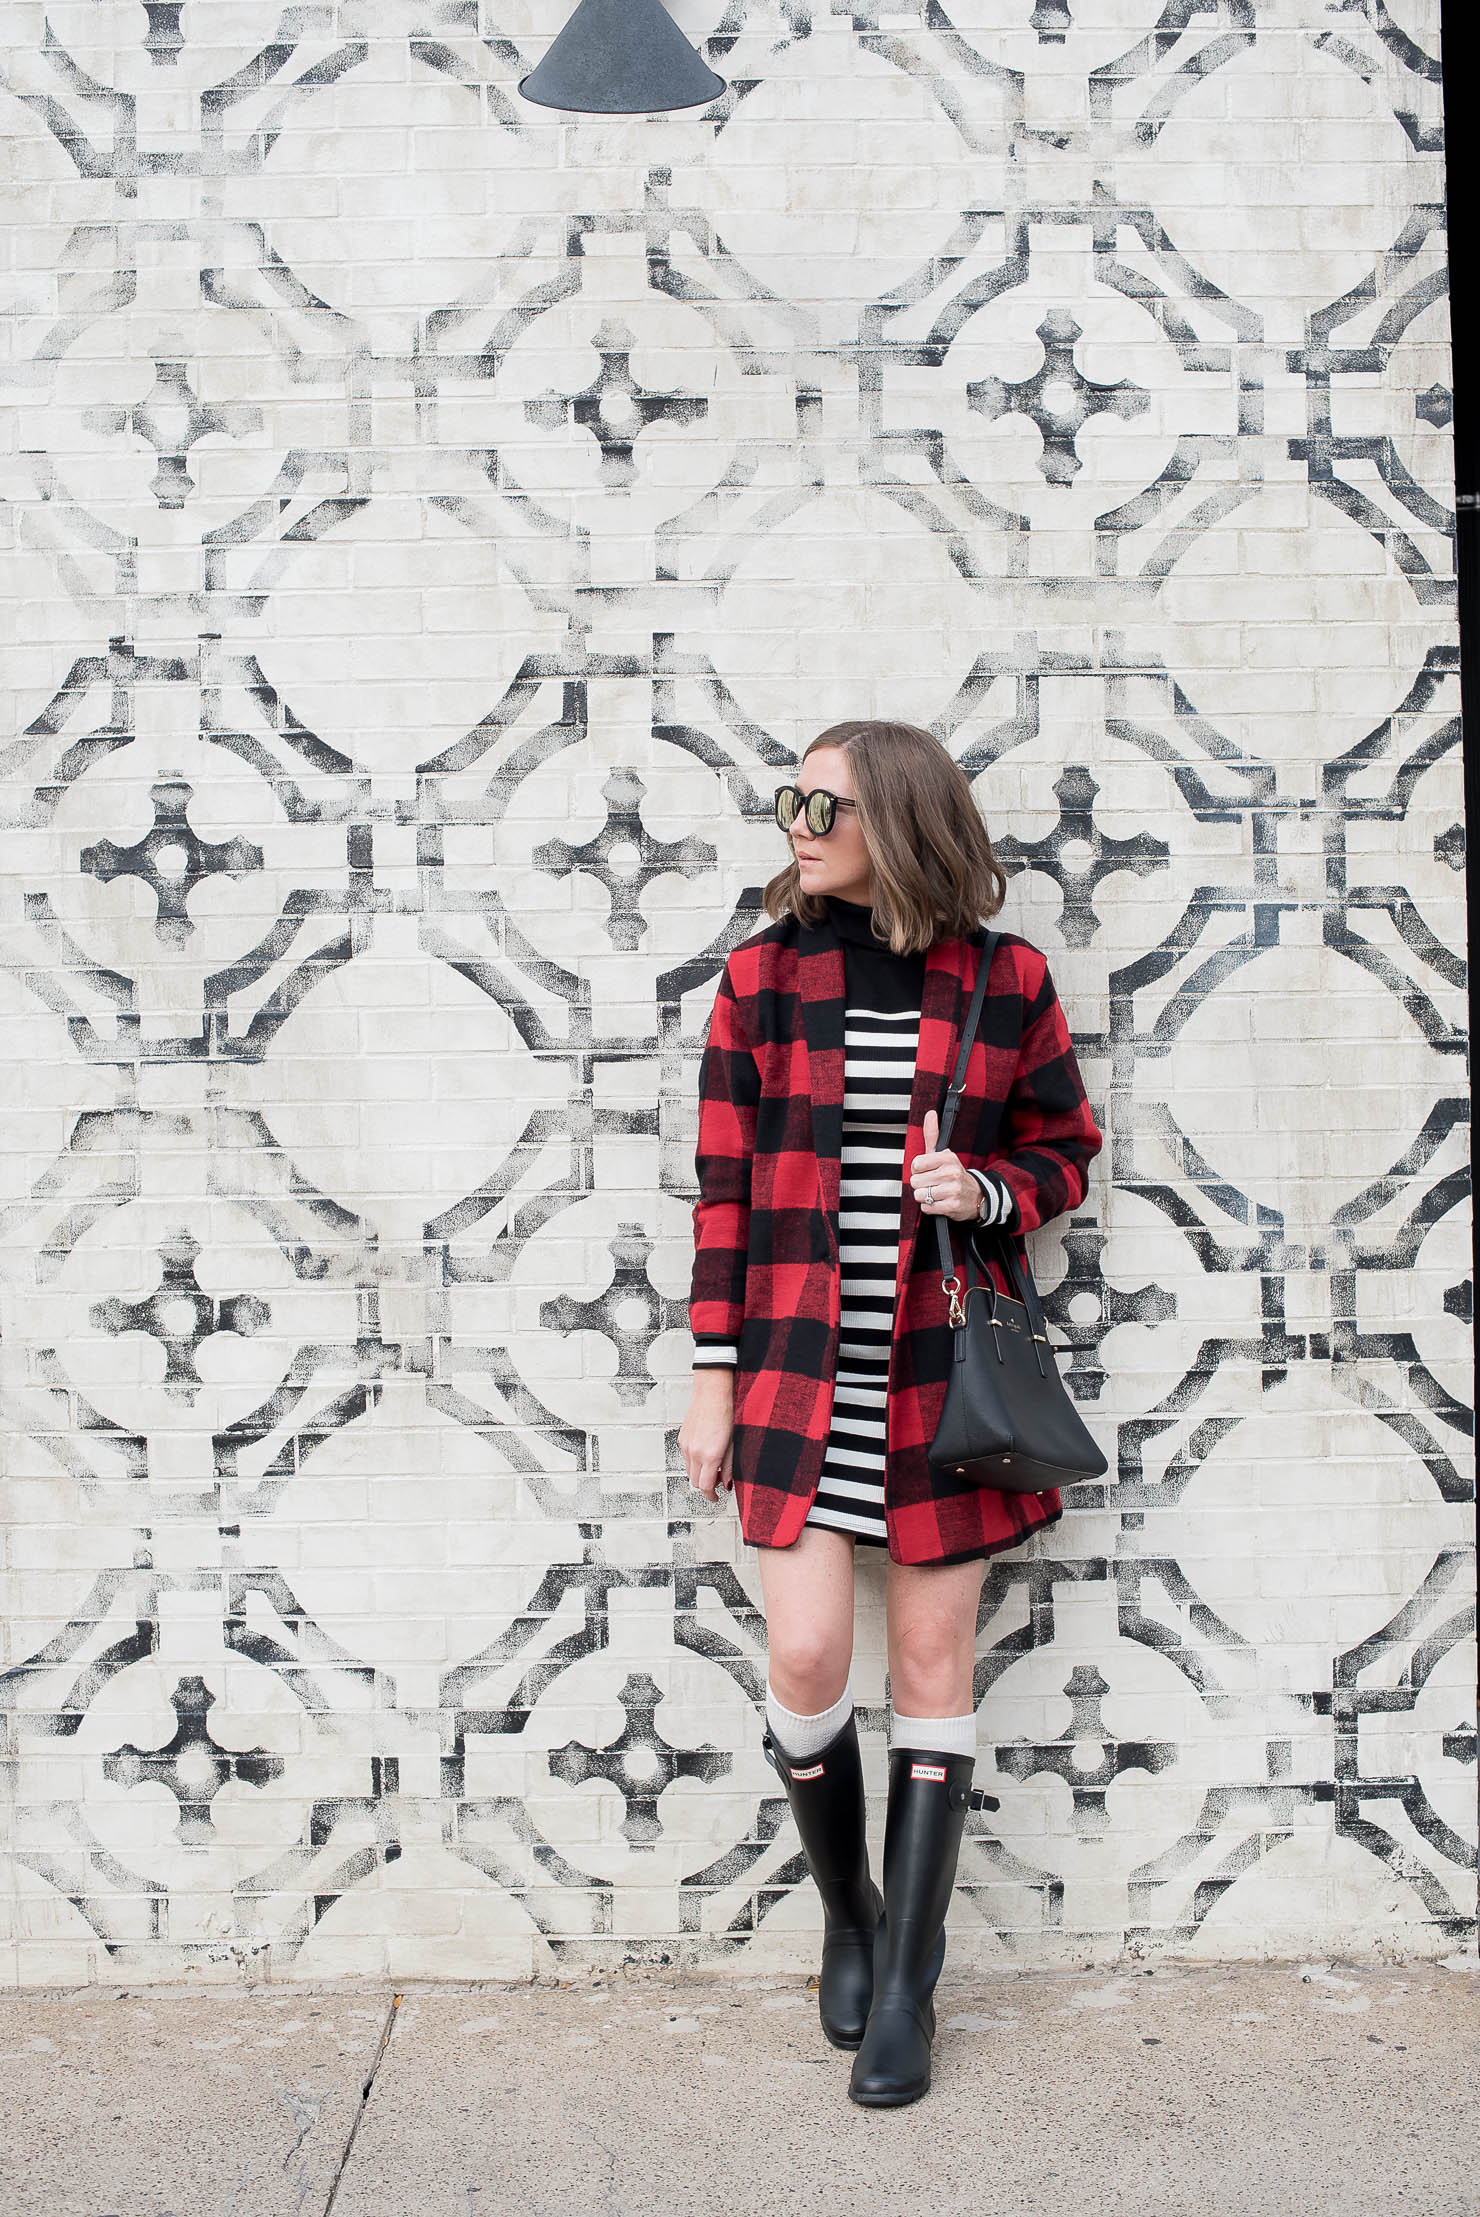 black-and-white-striped-mini-dress-and-red-buffalo-plaid-coat-with-hunter-boots-the-perfect-blogger-wall-for-photos-dowtown-chicago-mild-winter-outfit